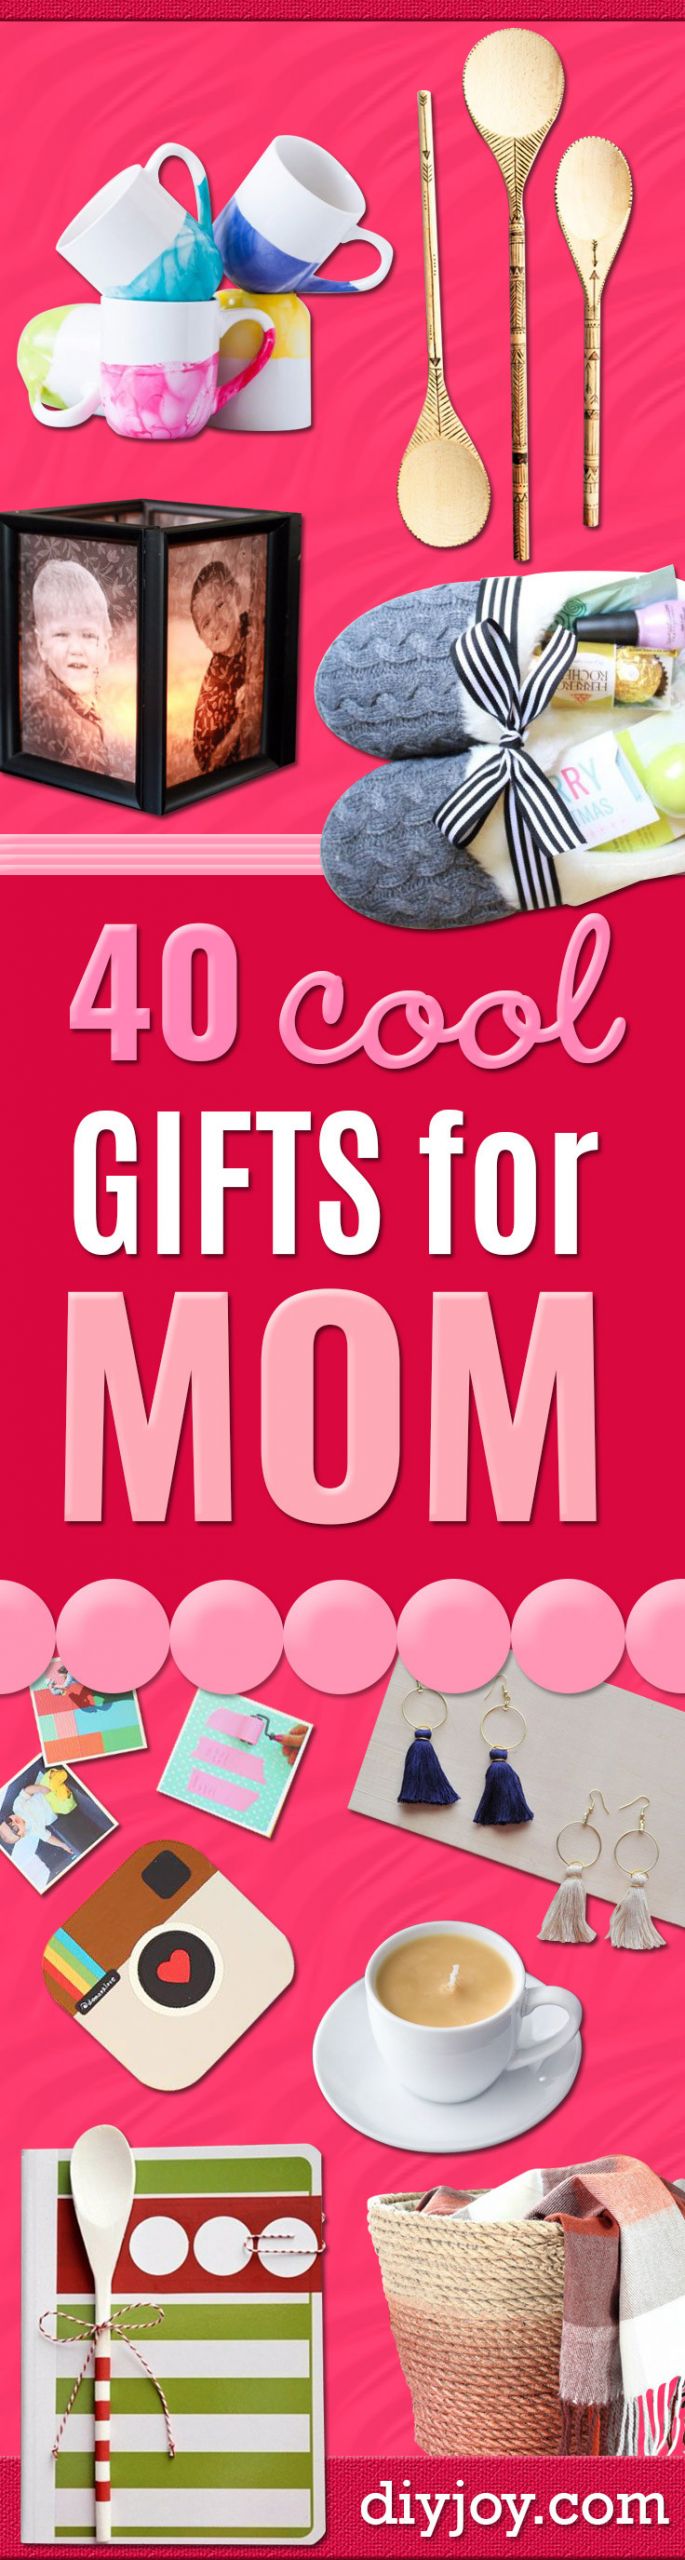 Christmas Gift Ideas For Moms
 40 Coolest Gifts To Make for Mom